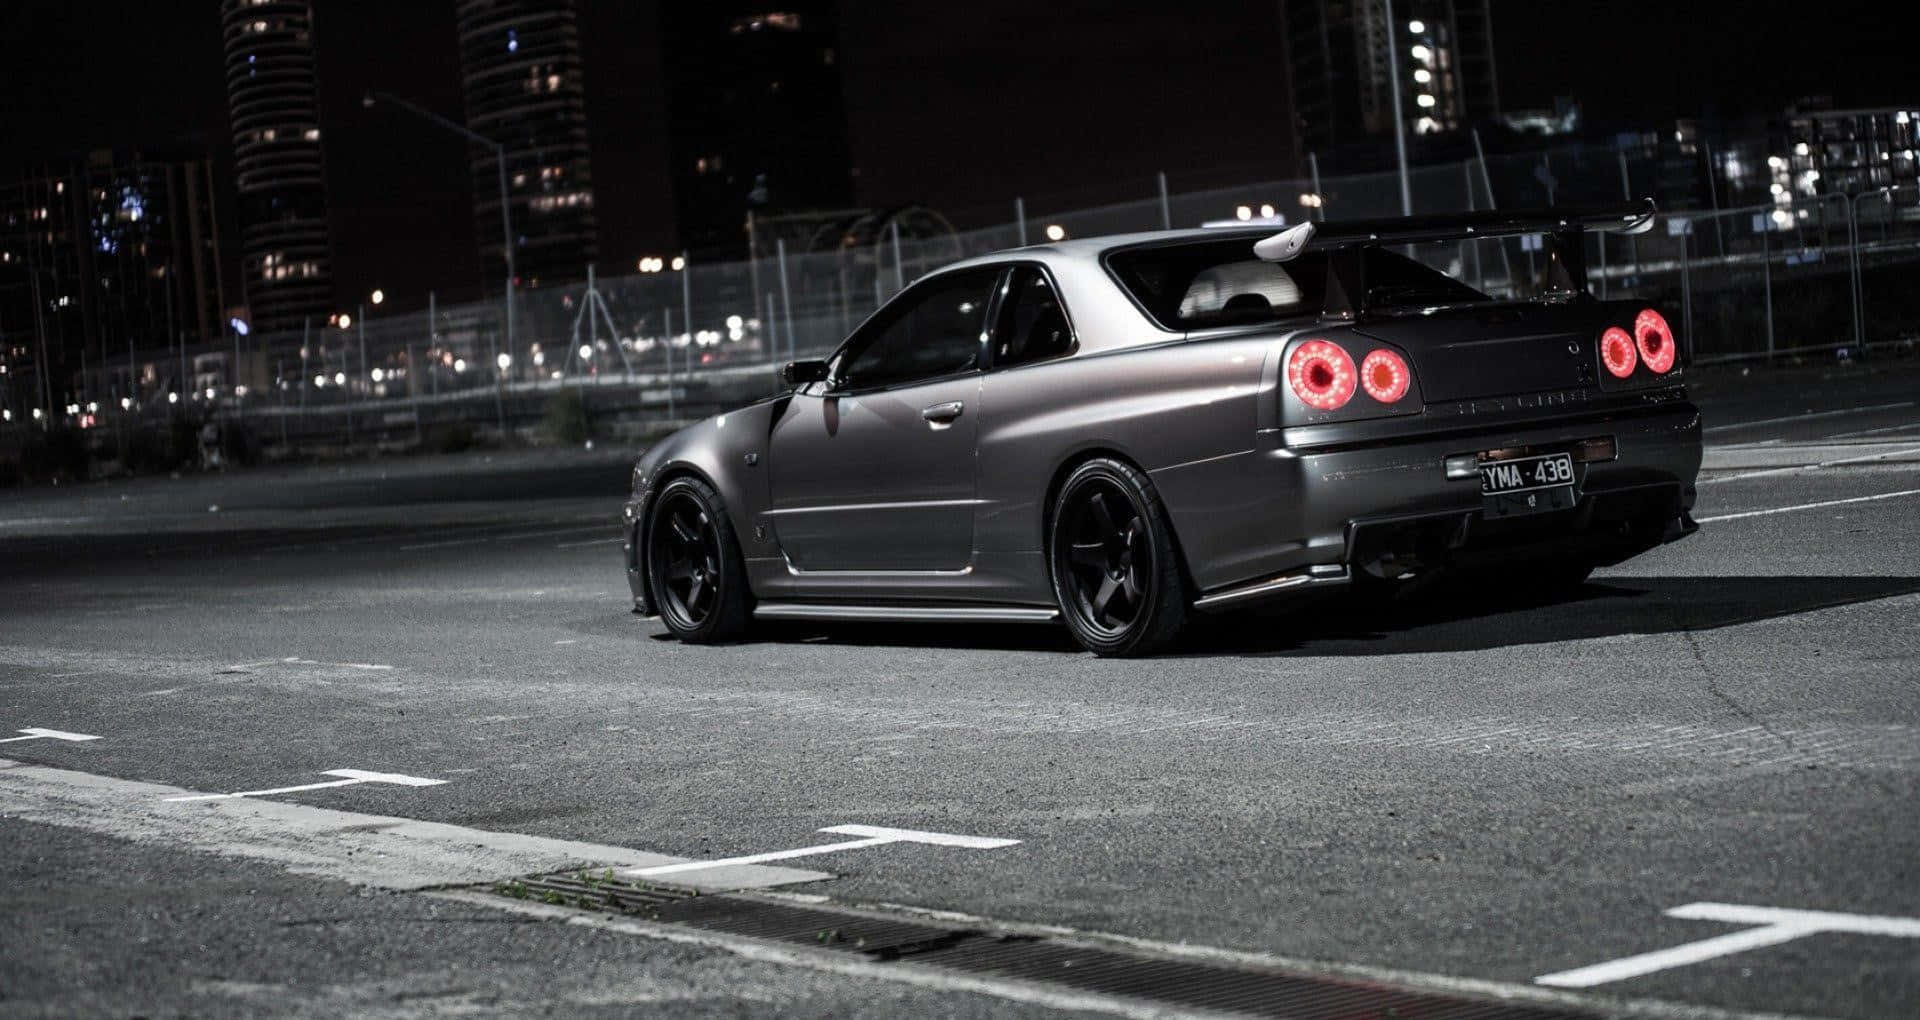 Stunning Nissan GTR Tuned Car Showcased in Vibrant Colors Wallpaper